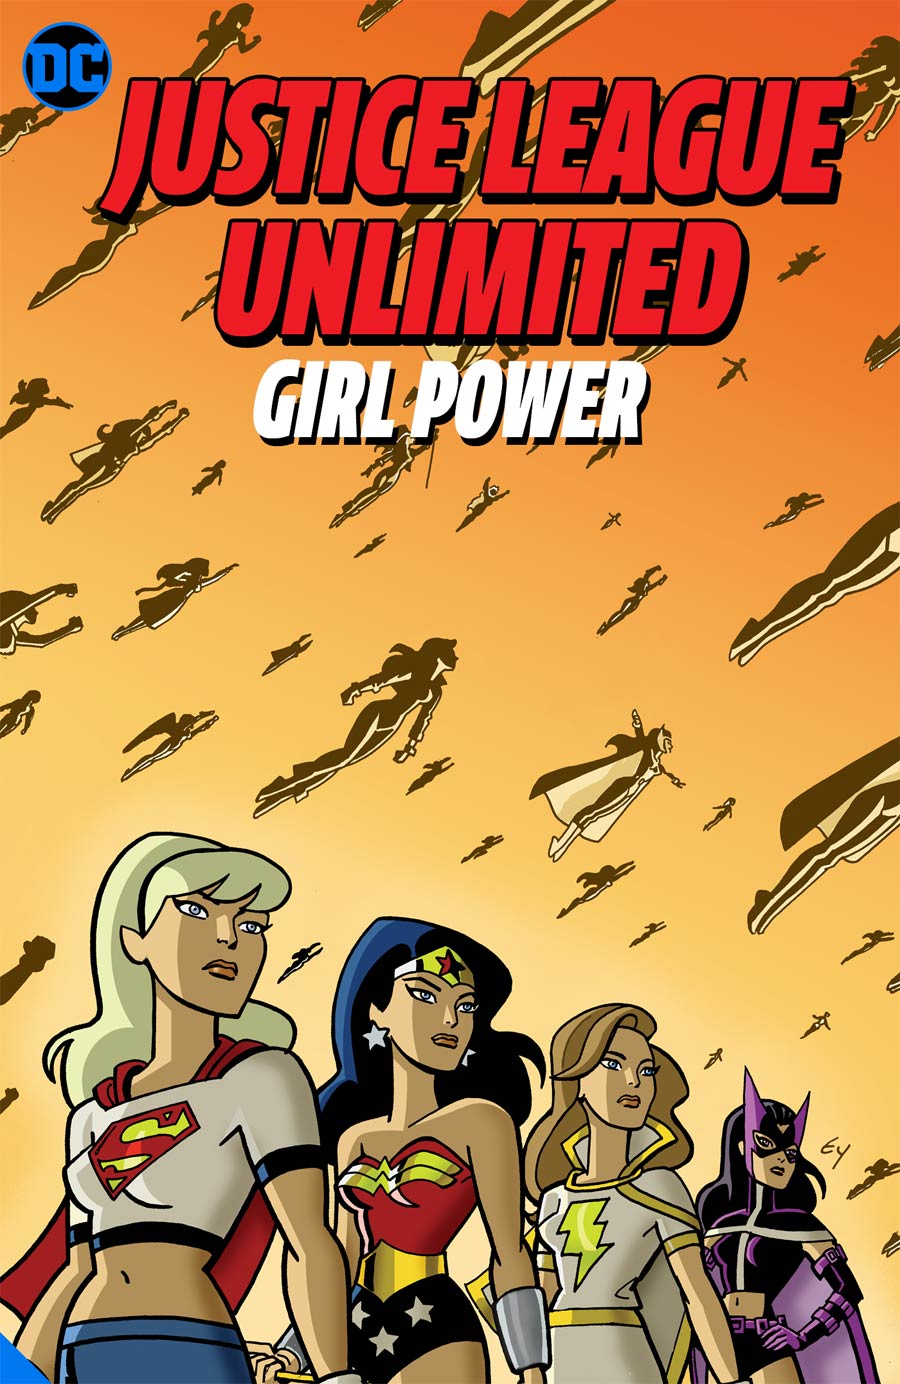 Justice League Unlimited Girl Power TP